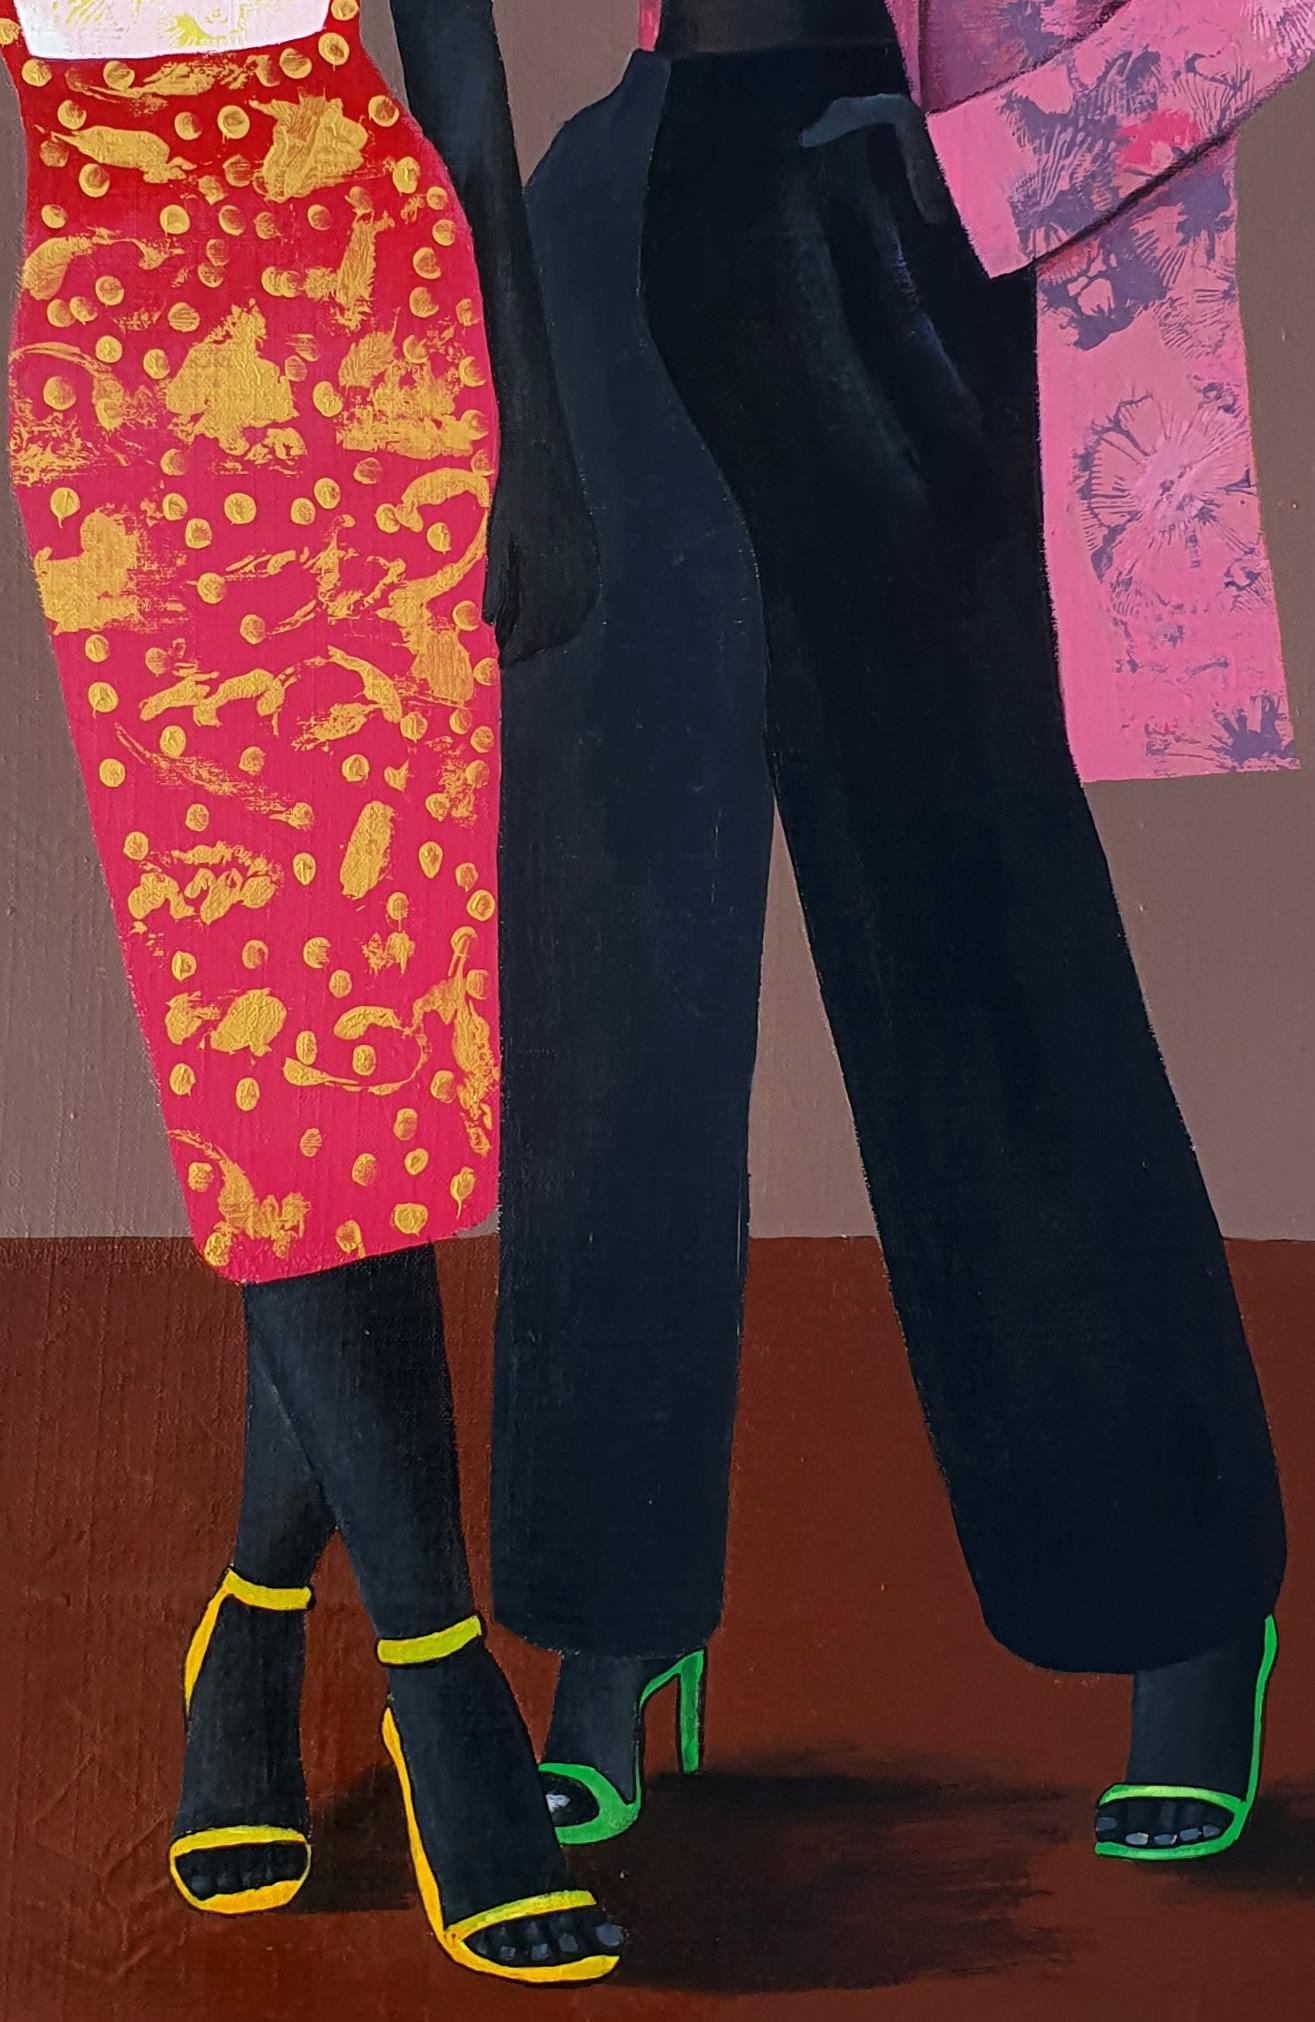 A La Mode (Fashionable) - Contemporary Painting by Samson Toba